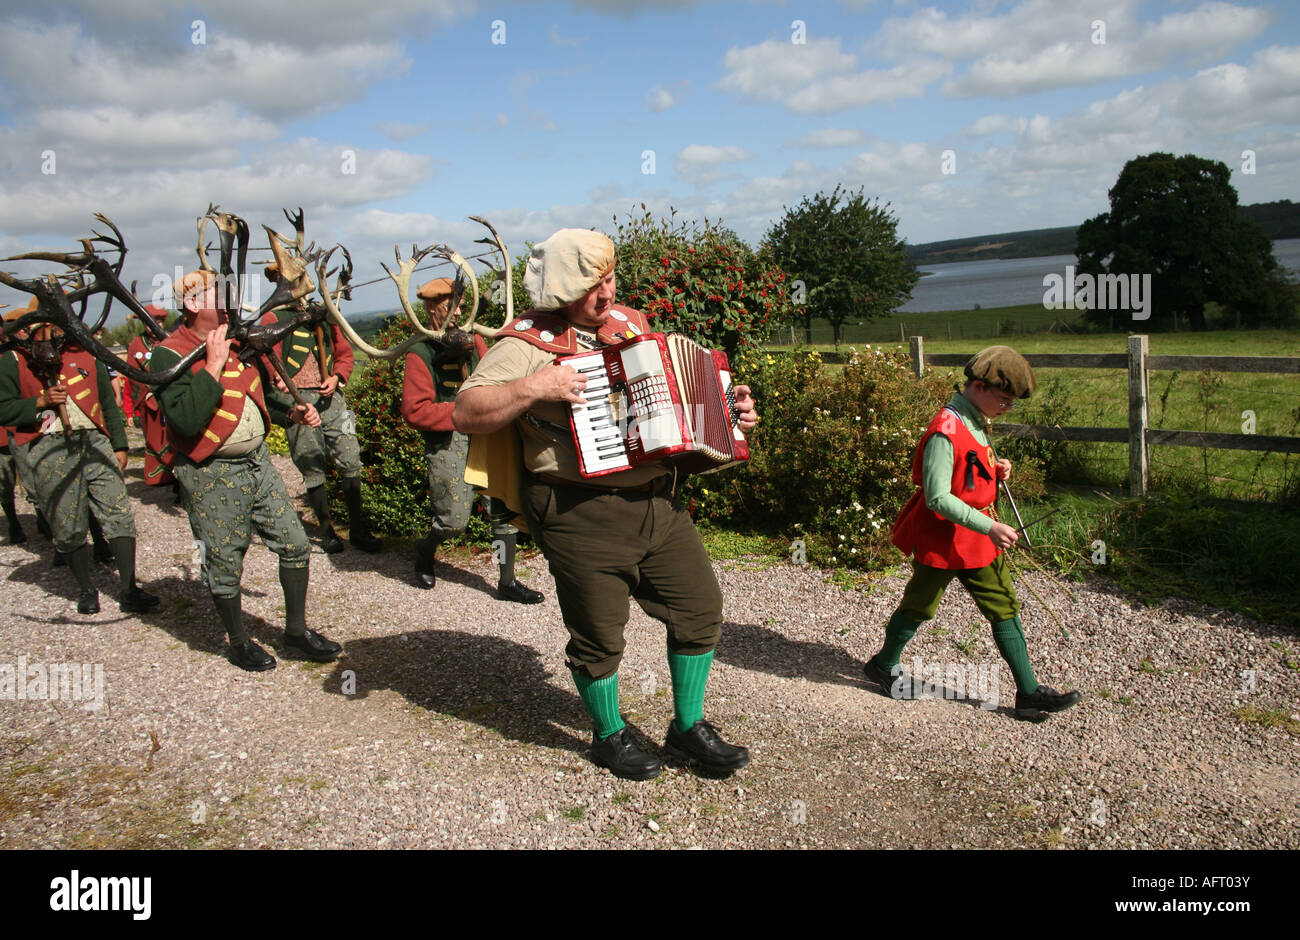 Horn Dance Abbot’s Bromley Staffordshire UK. Stock Photo